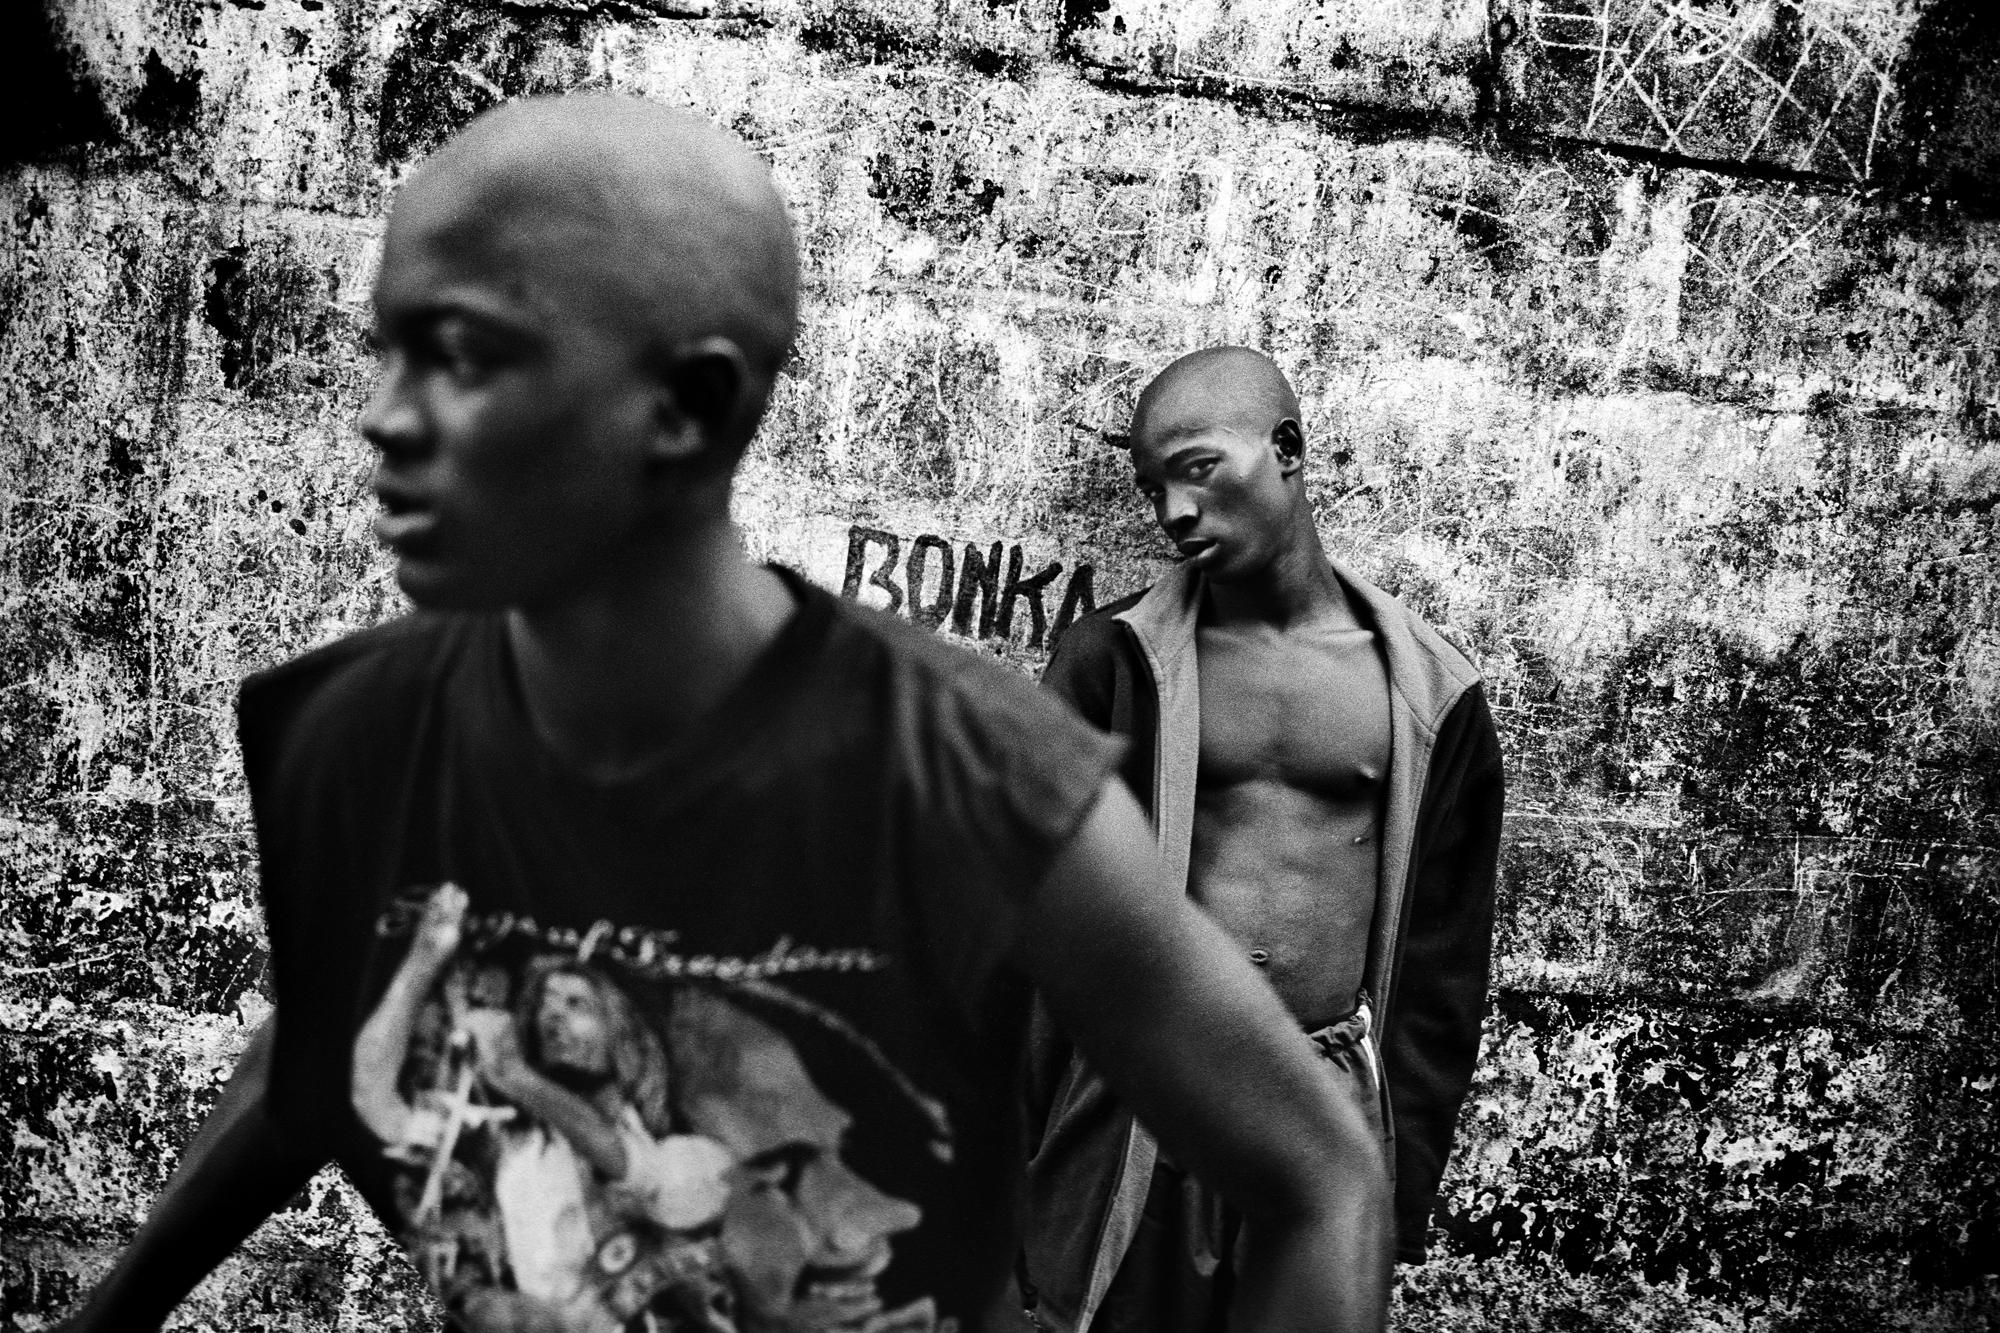 City of rest - SIERRA LEONE Freetown.
August 2007.
Inmates at the City...